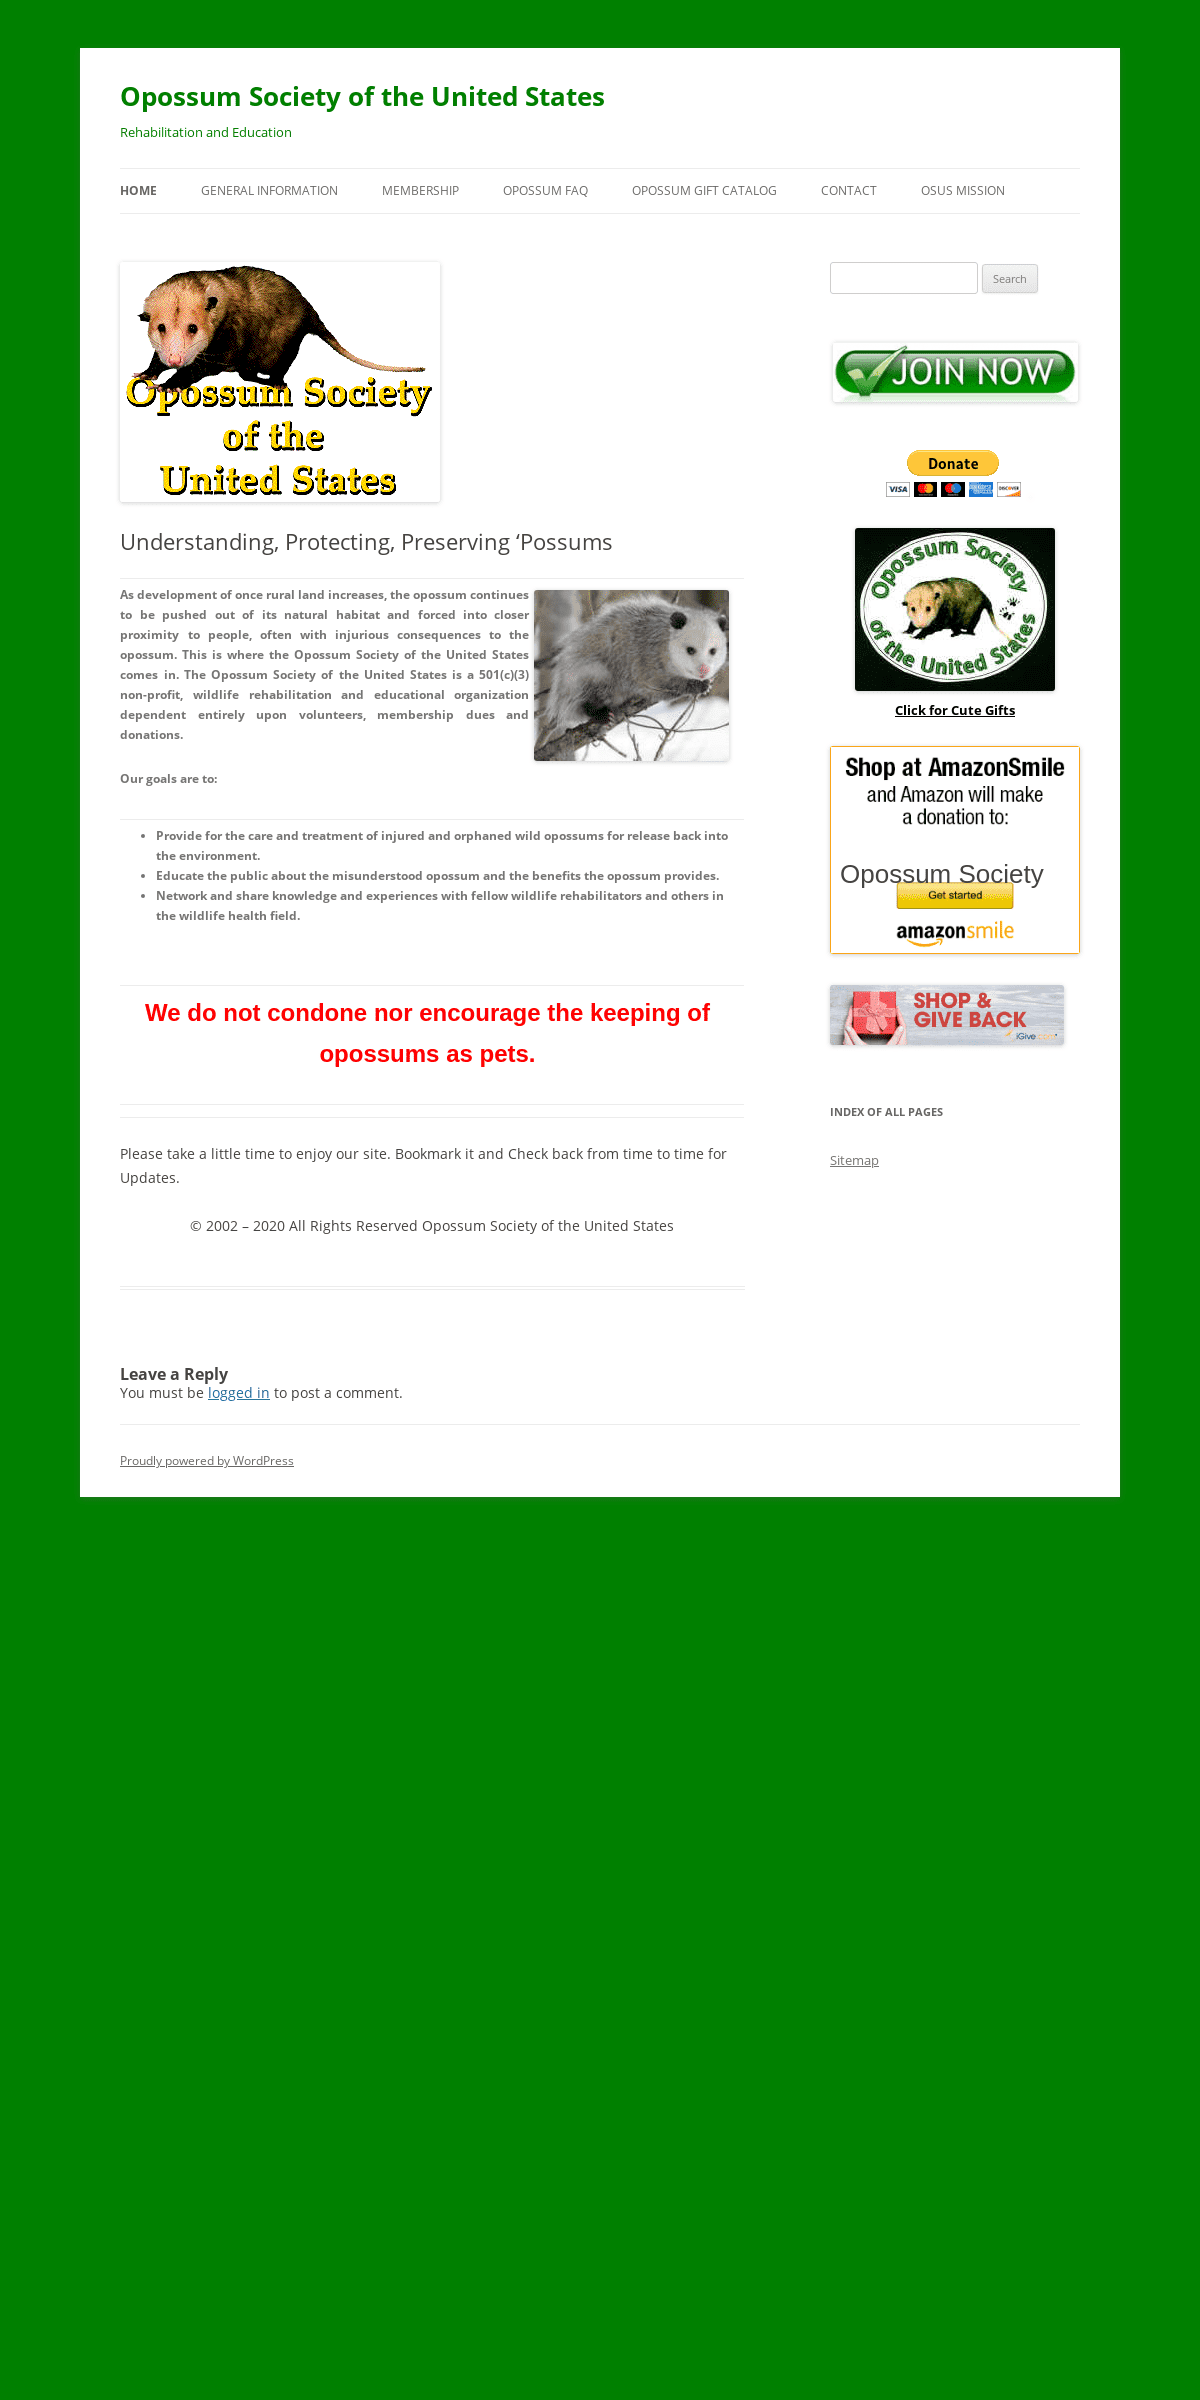 A complete backup of opossumsocietyus.org